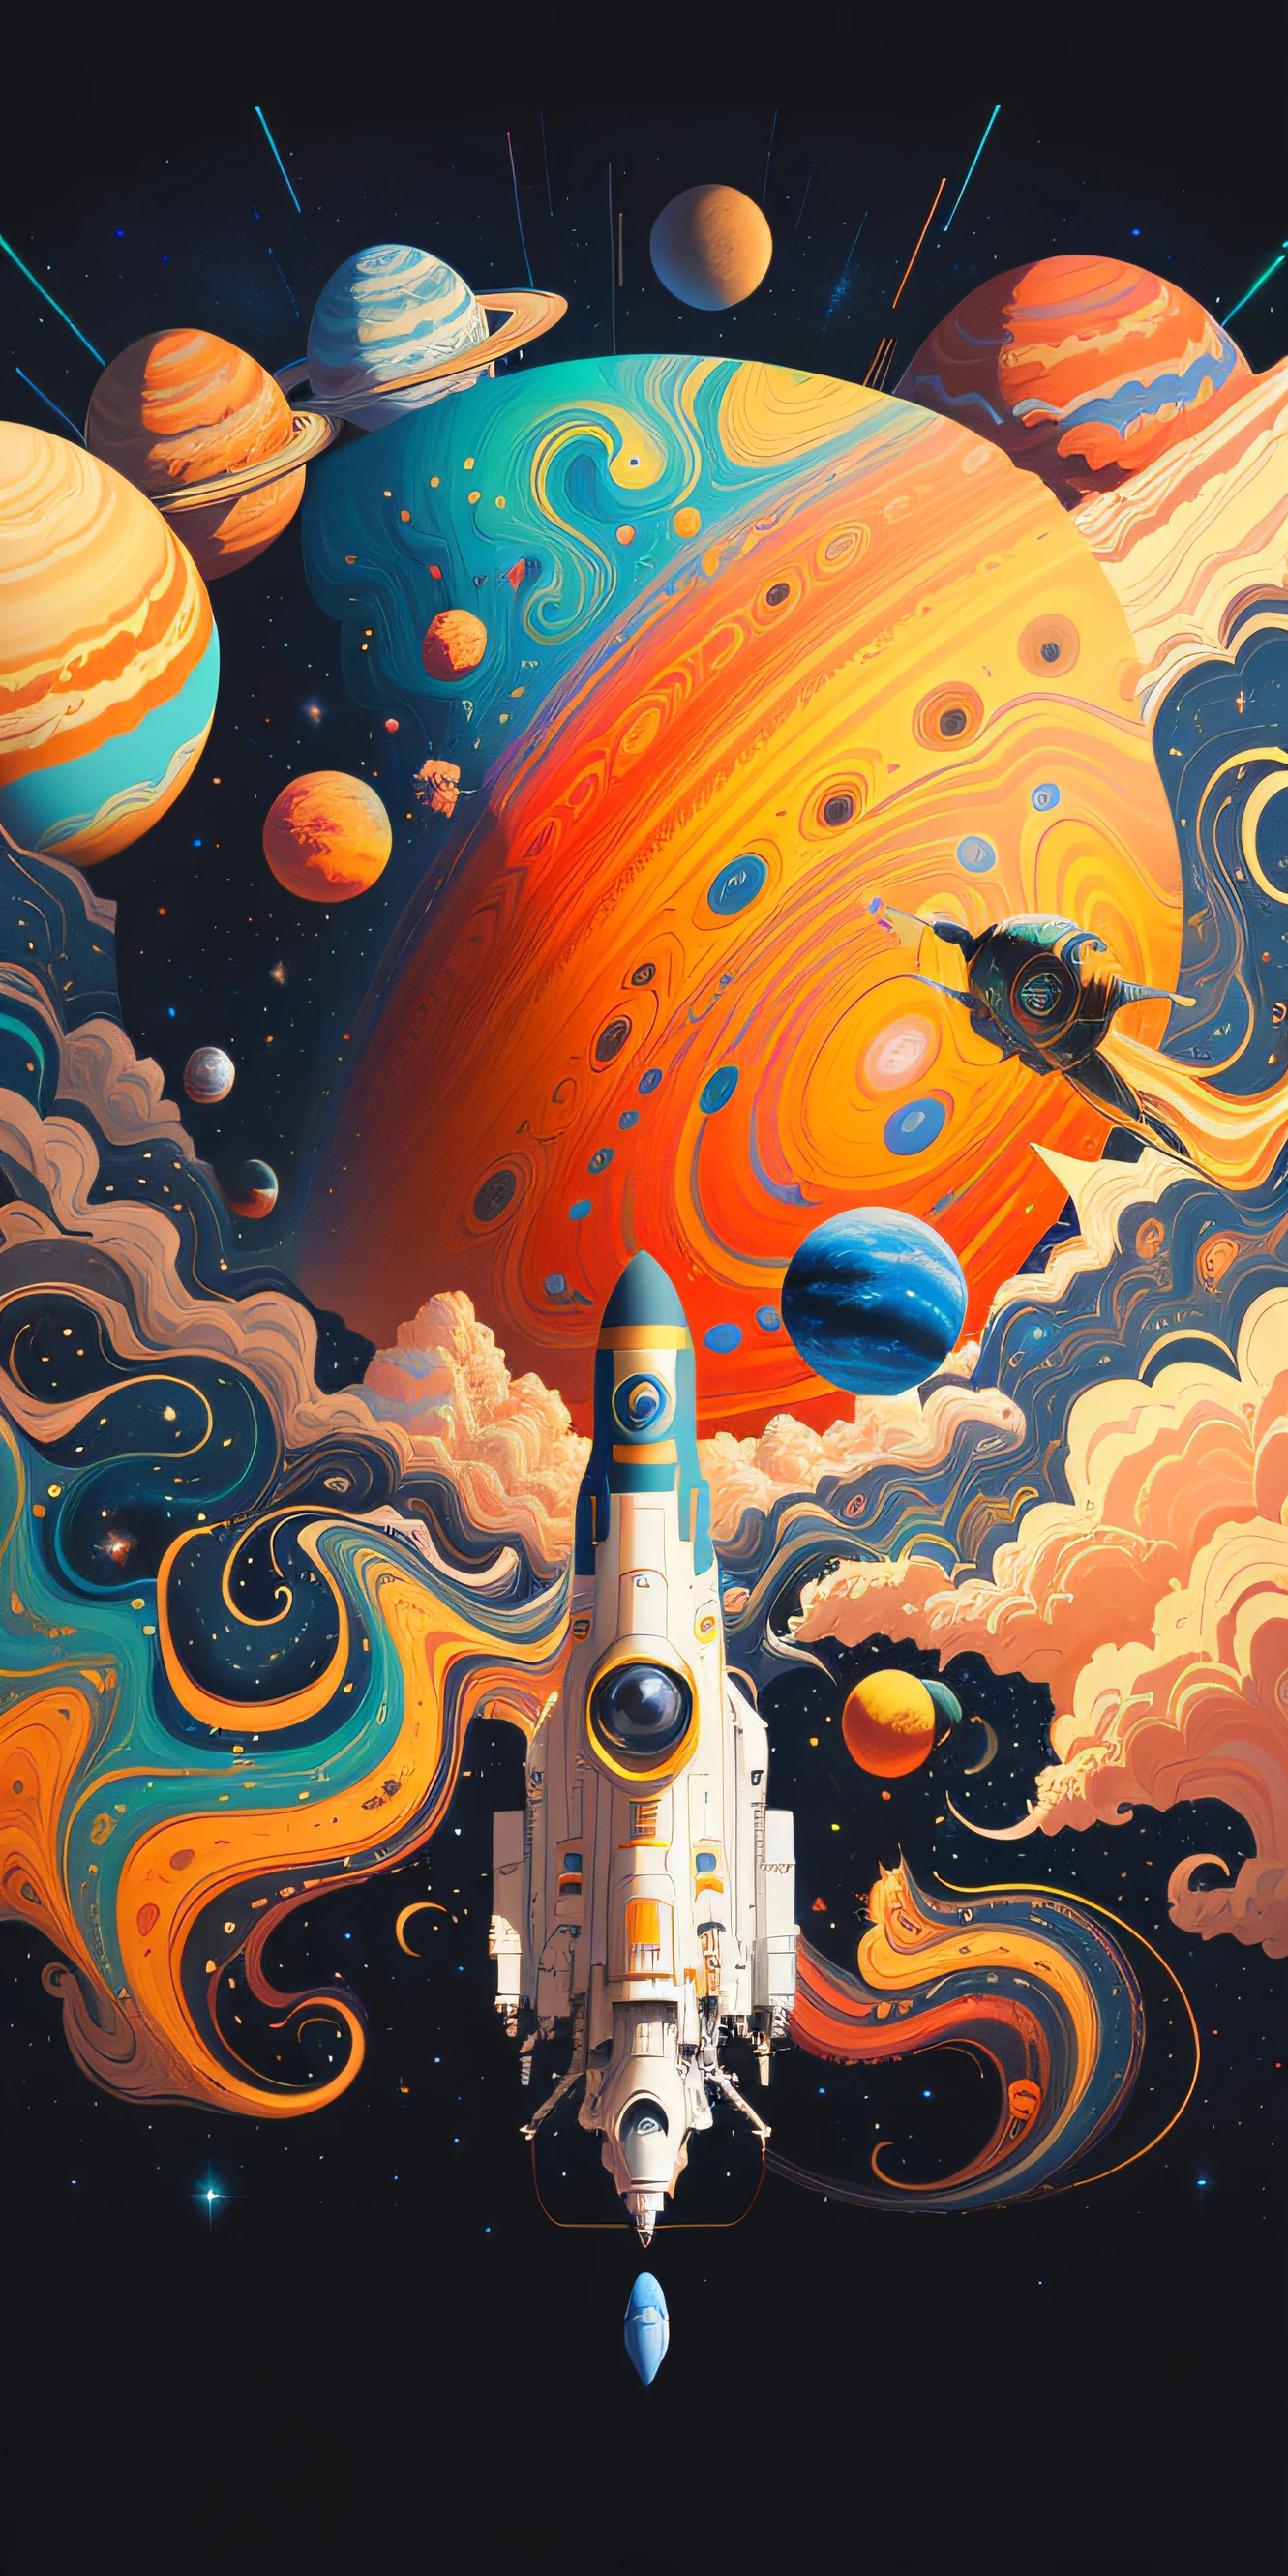 Space-themed poster with rockets and planets, cosmic and colorful, space colors, Space travelling, space graphics art in background, plethora of colors，detail-rich, Psychedelic art style, Space art, Space travelling, psychedelic surreal art, psychedelic illustrations, 4k highly detailed digital art, Amazing wallpapers, trippy art, Surreal space, hyperdetailed colourful